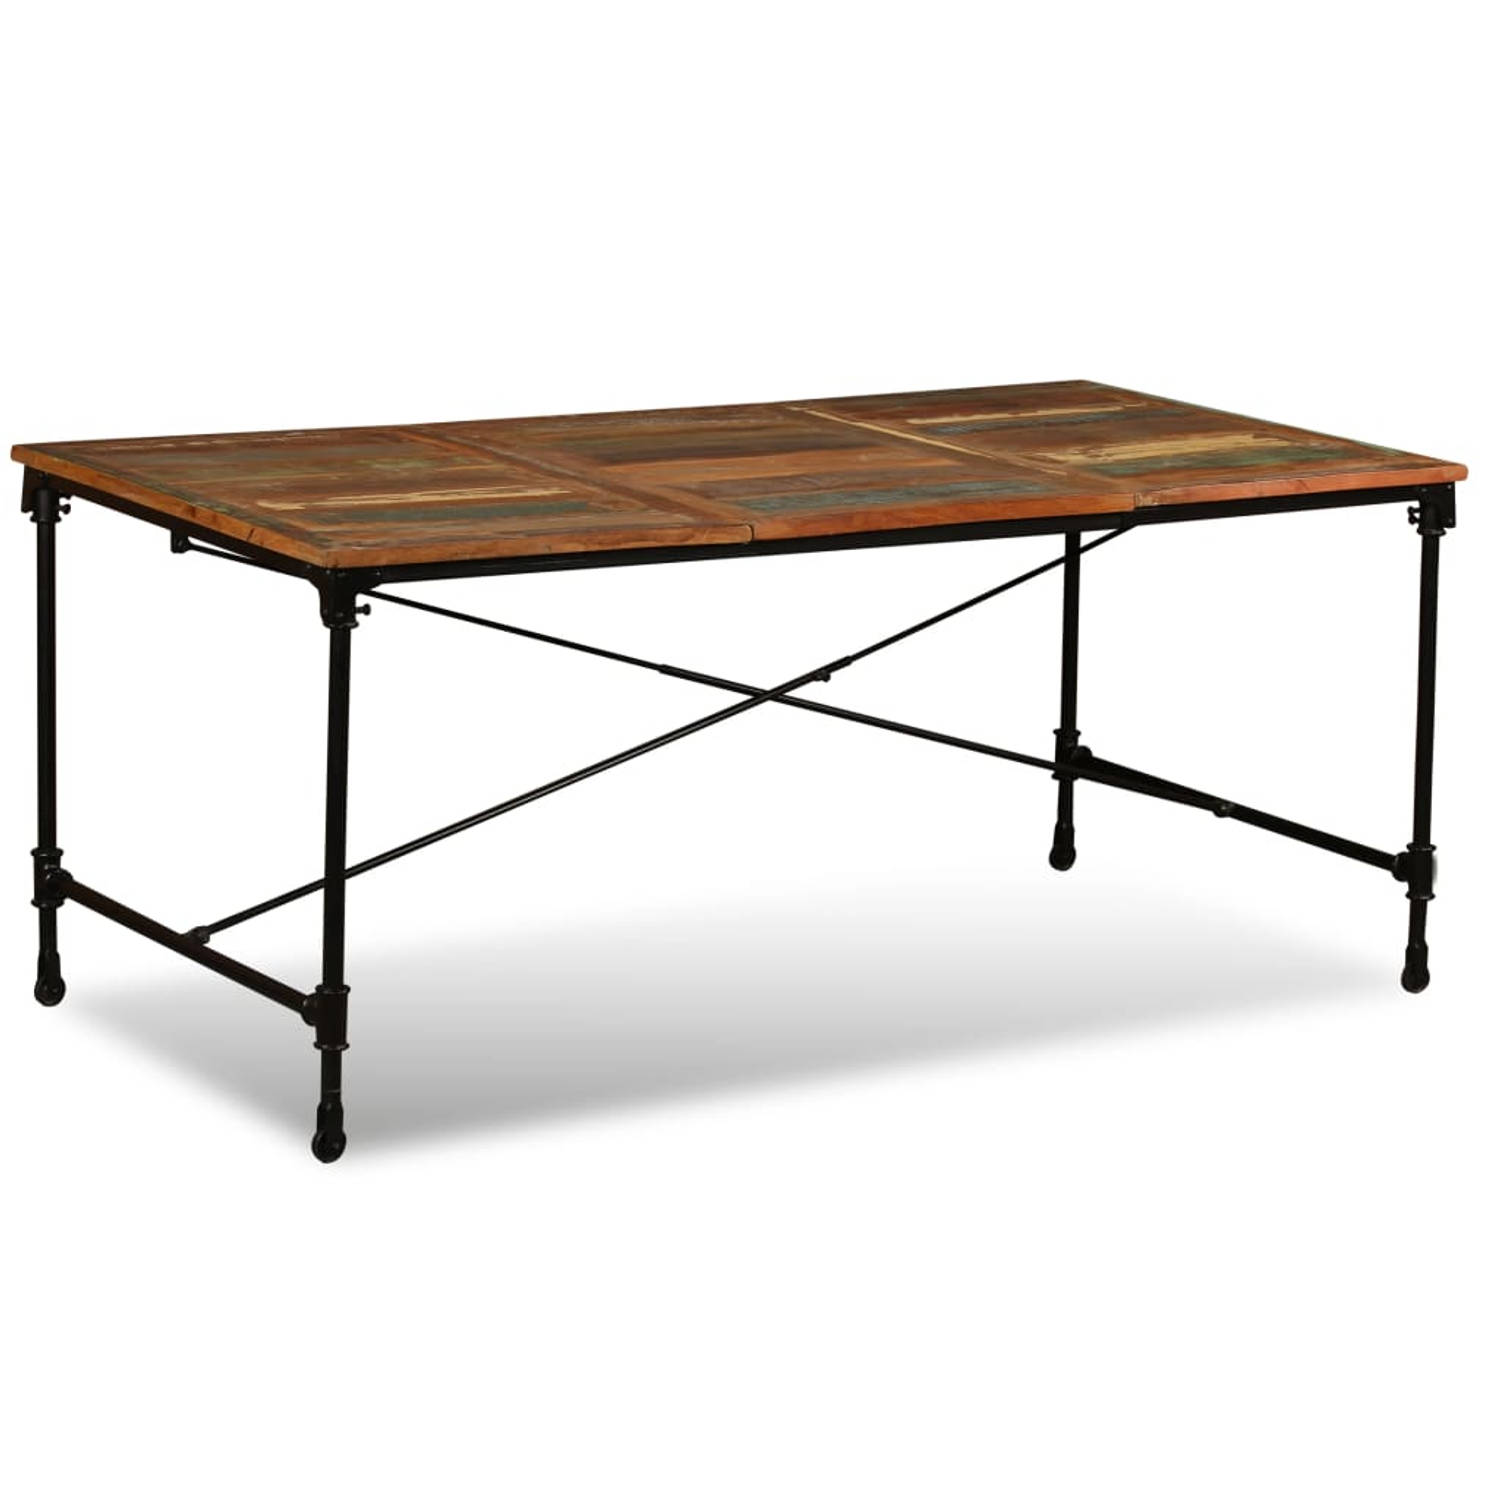 The Living Store Eettafel 180 cm massief gerecycled hout Tafel